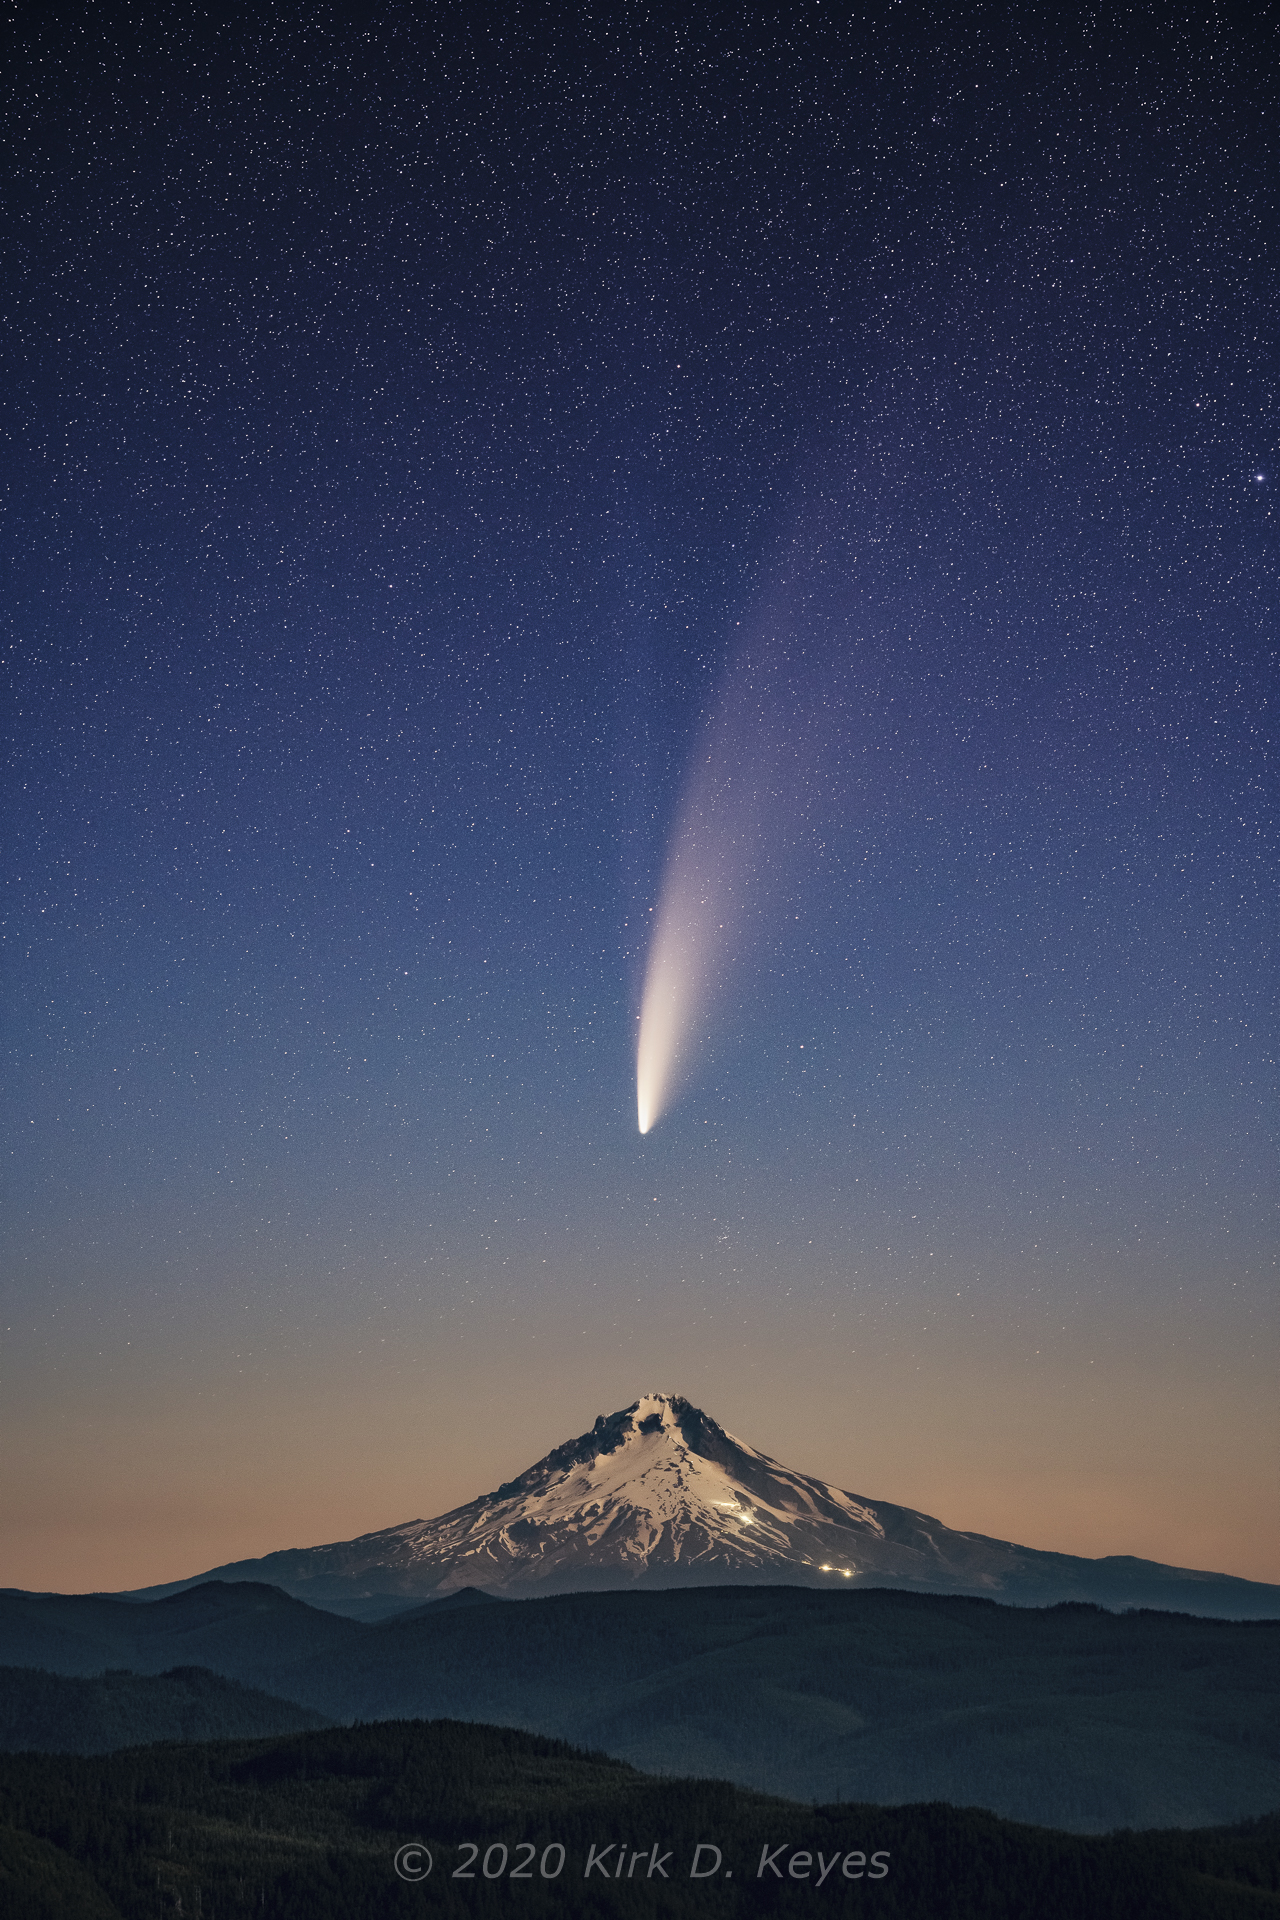 Comet NEOWISE and Mt Hood, Sony a7III, Sigma 105mm, ISO 3200, f/2.5, 3.2 seconds. Image processing by Marybeth Kiczenski.